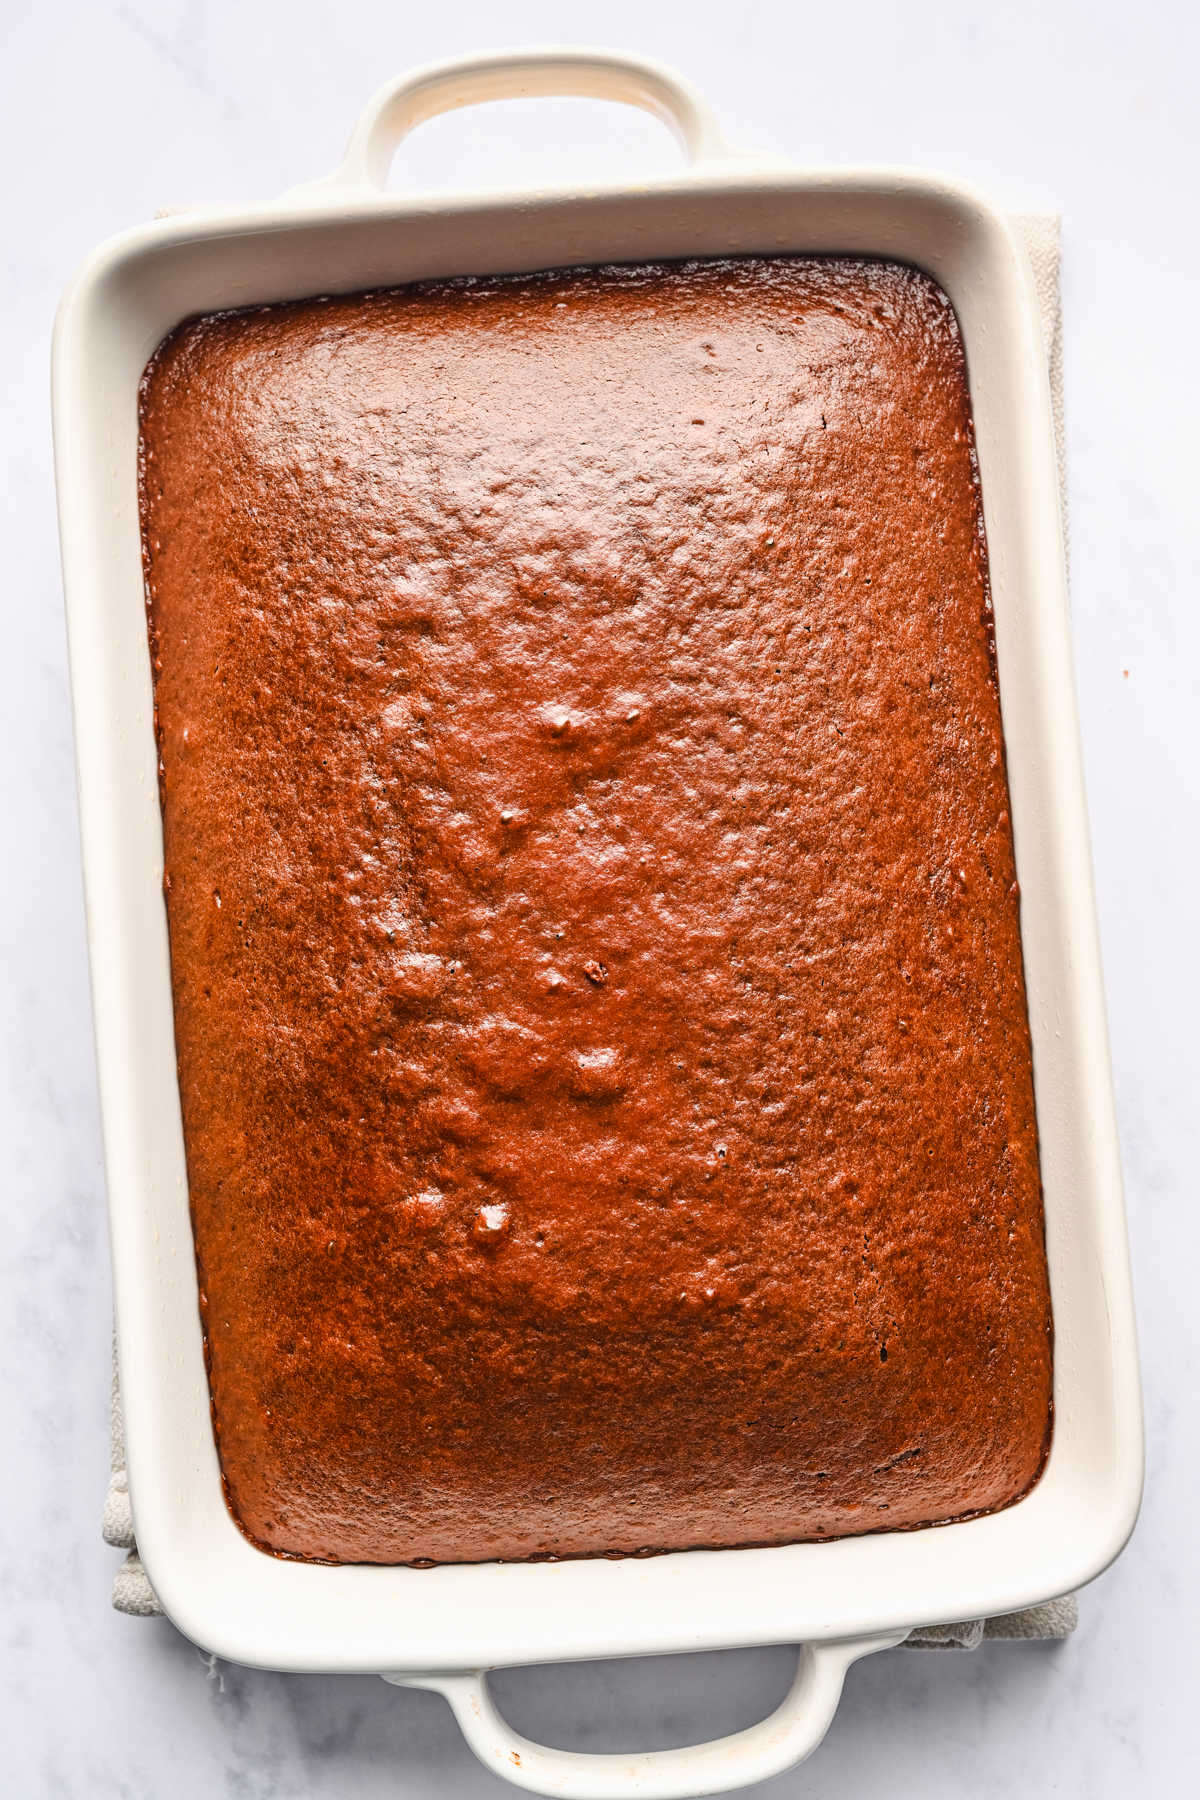 Baked Coca Cola cake in a white baking pan.